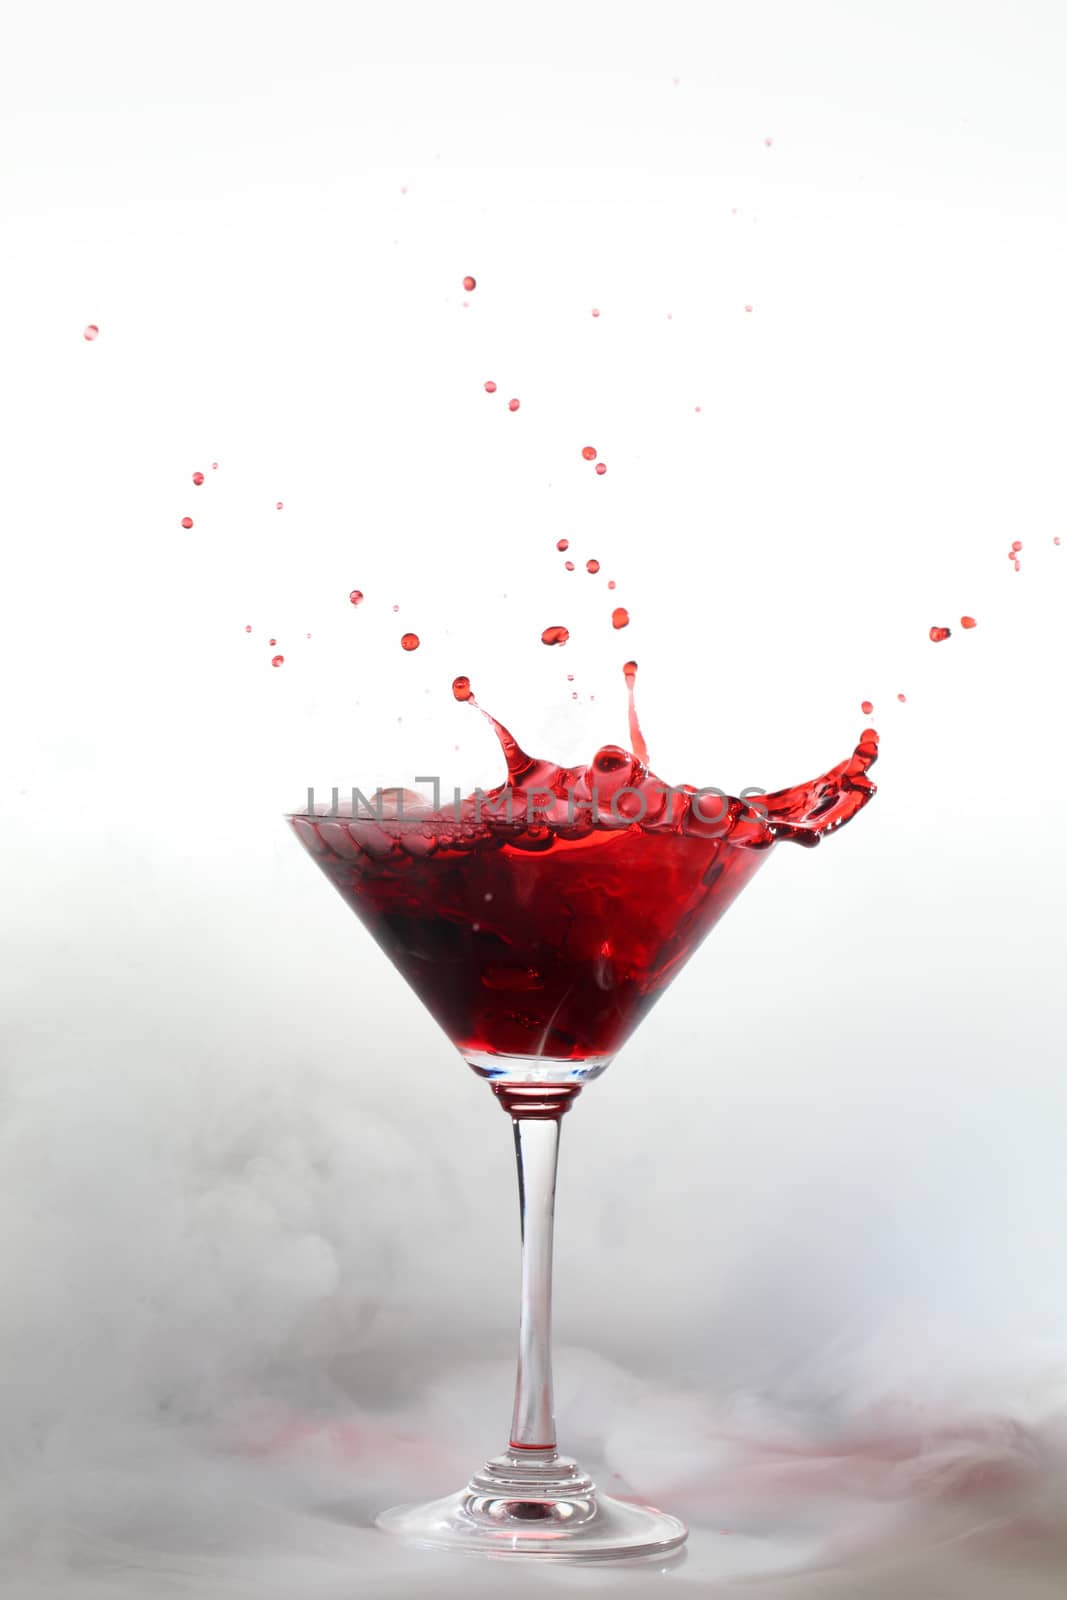 Vertical photo of a splash colored drink with smoke